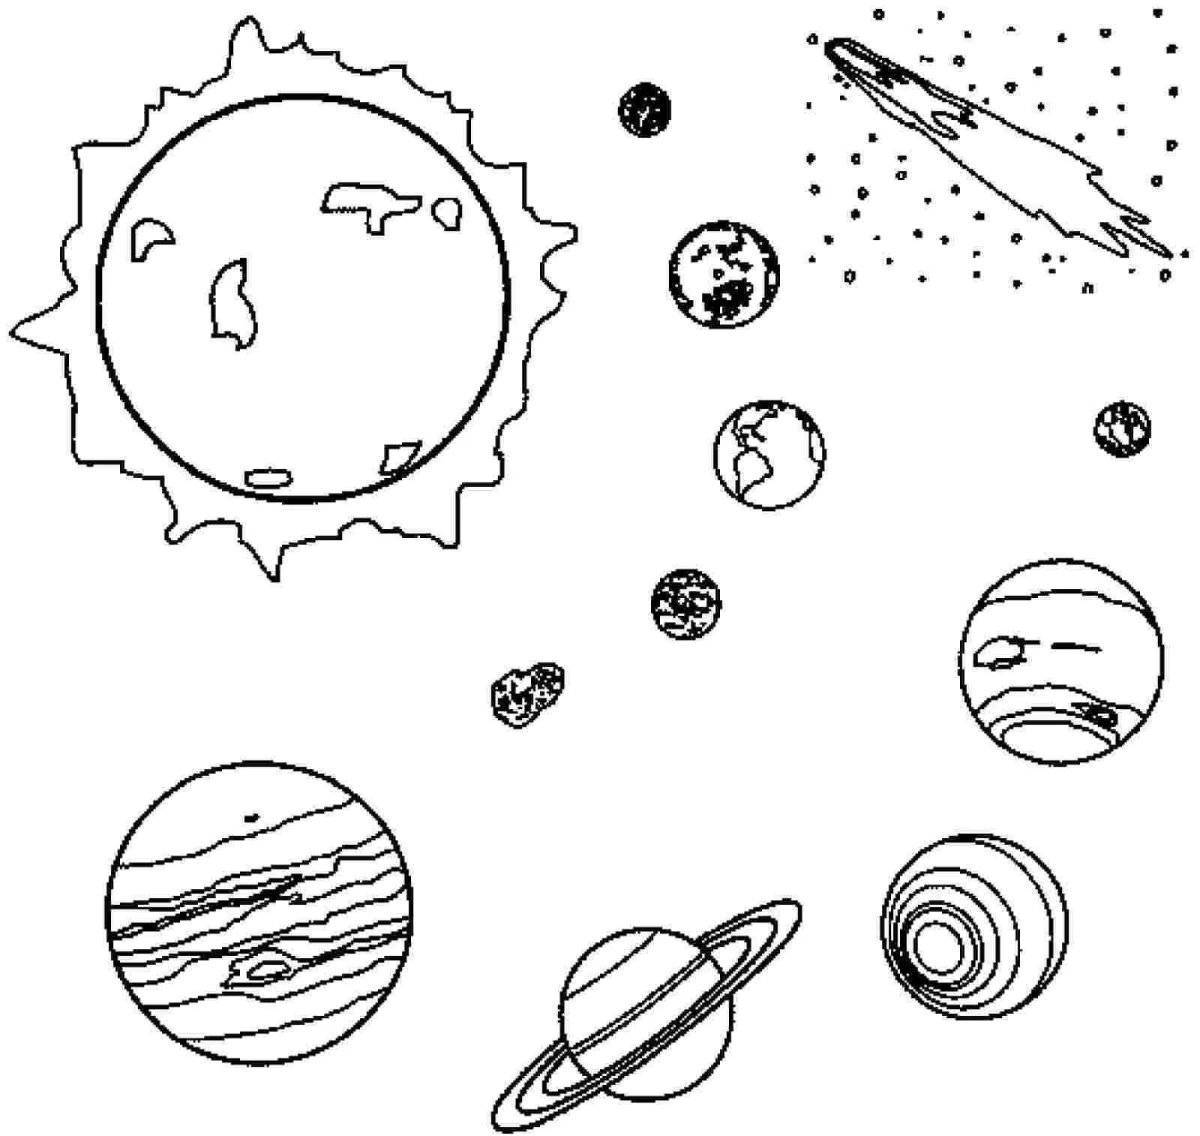 Planets for kids #17